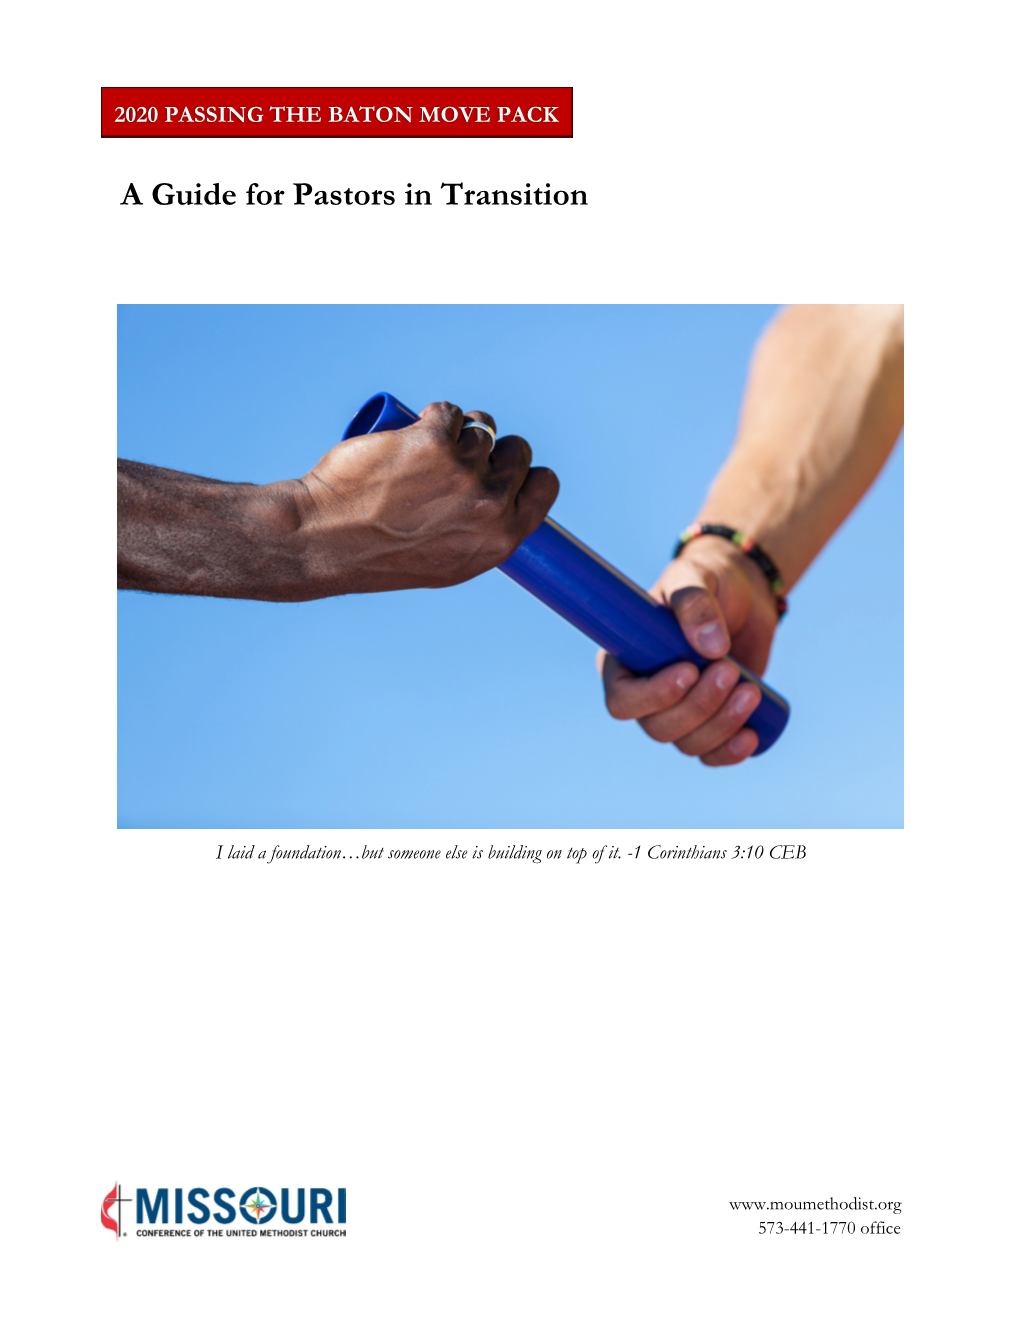 A Guide for Pastors in Transition